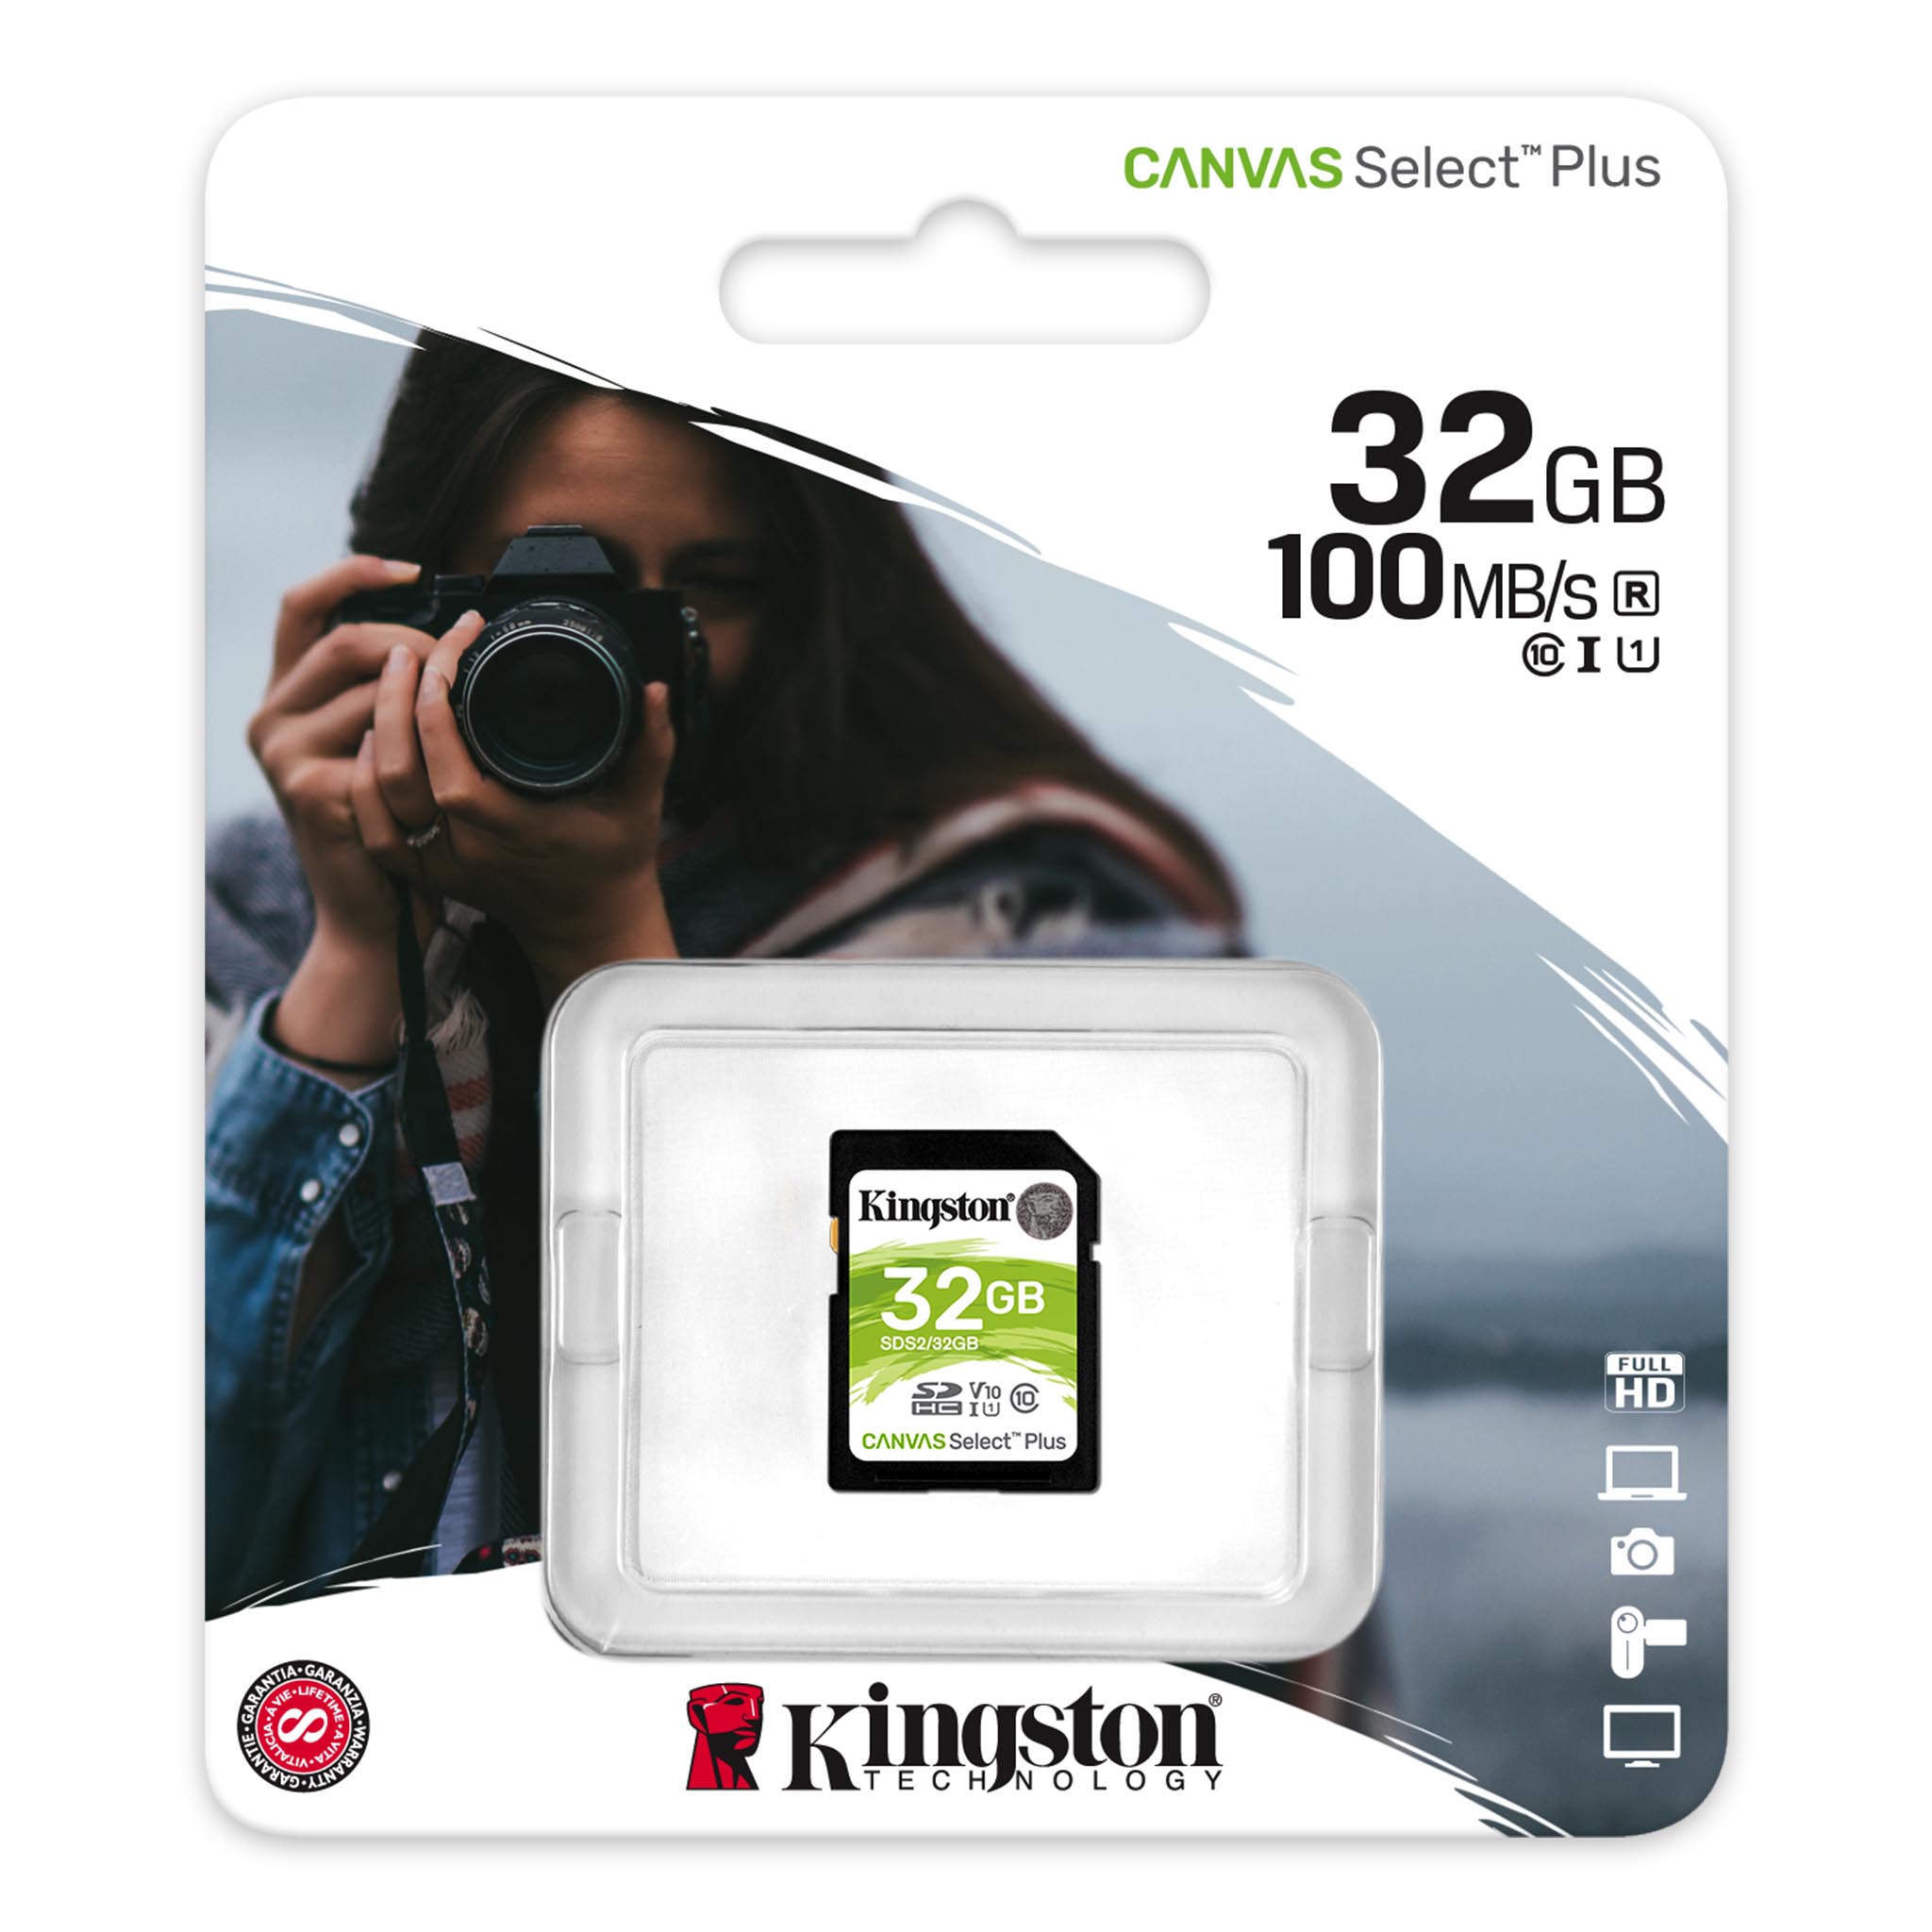 Kingston 512GB LG G Pad 8.3 Play Edition MicroSDXC Canvas Select Plus Card Verified by SanFlash. 100MBs Works with Kingston